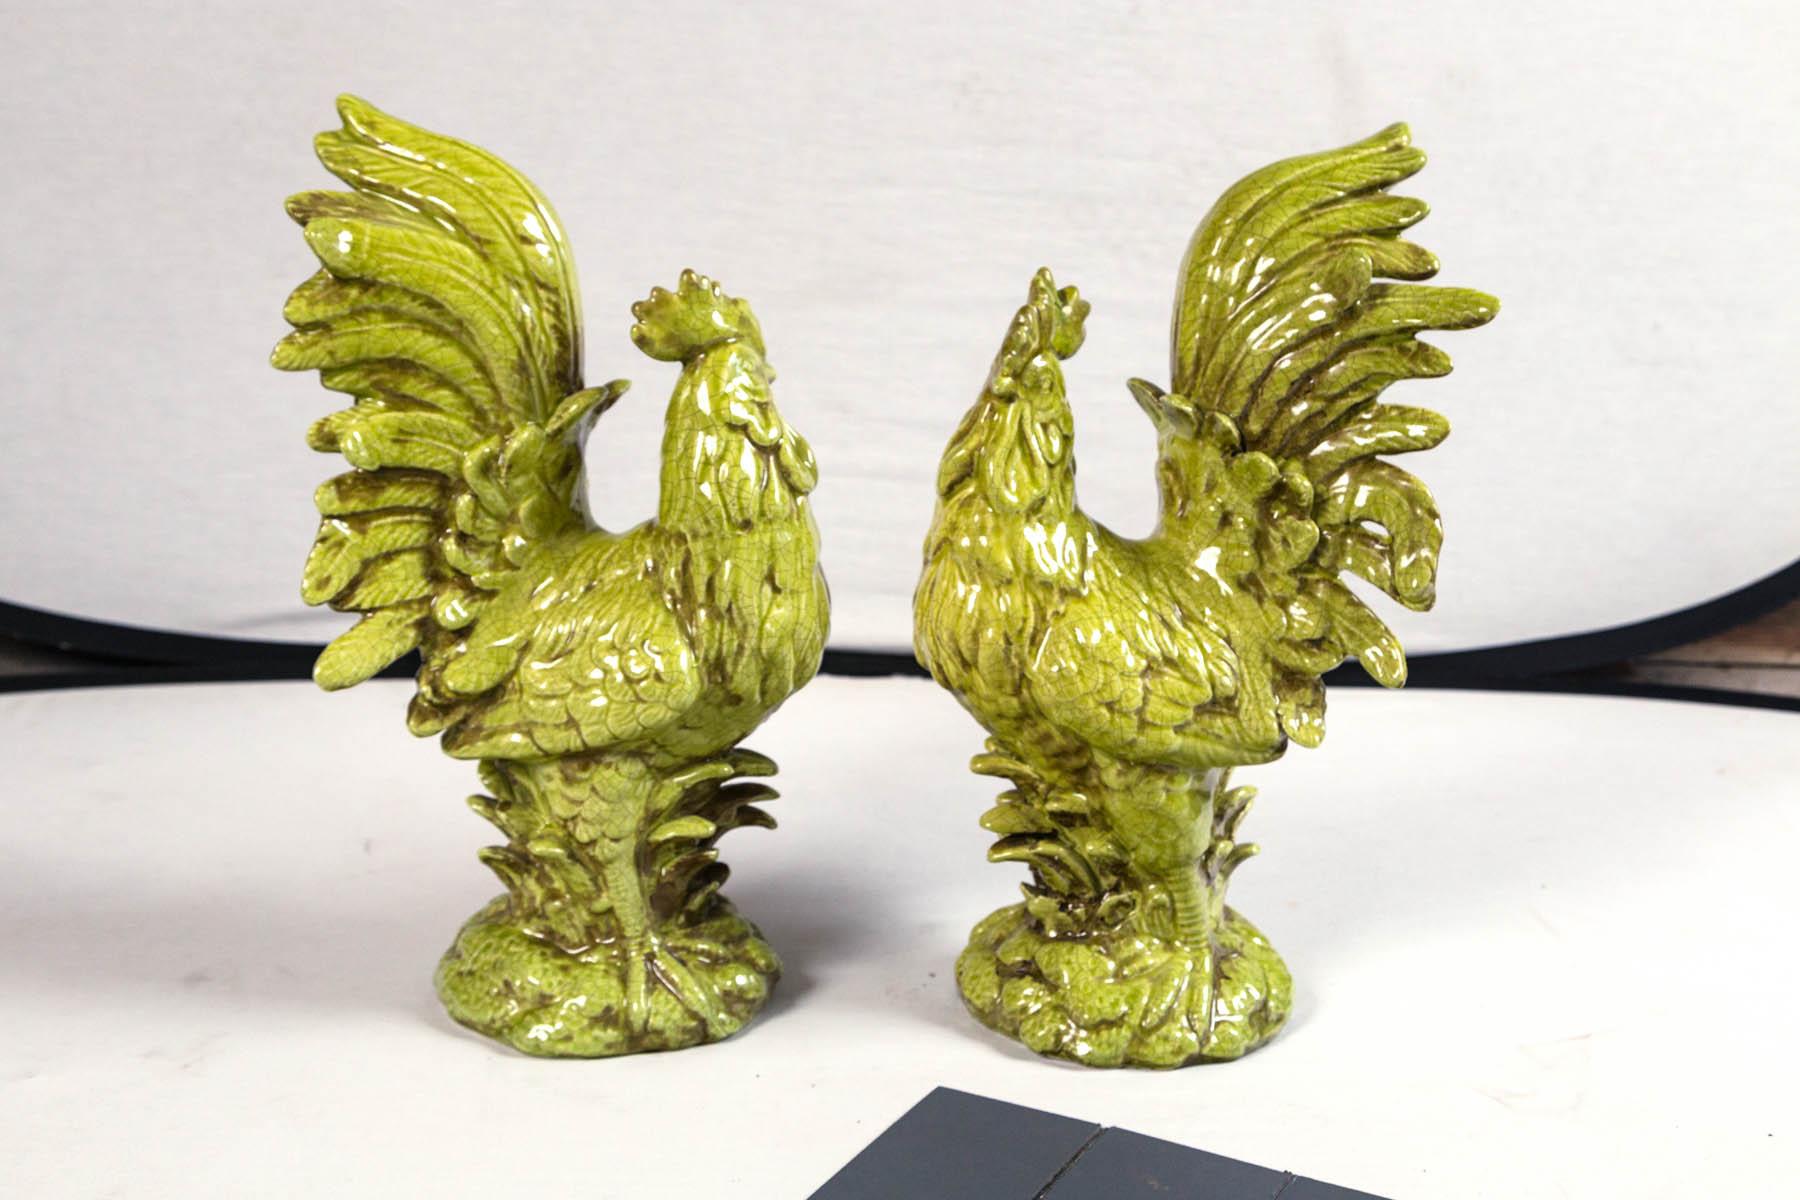 Pair of ceramic cockerels, Bassano, Italy, mid-20th century. Striking lime green crackle glaze with beautiful molded details.